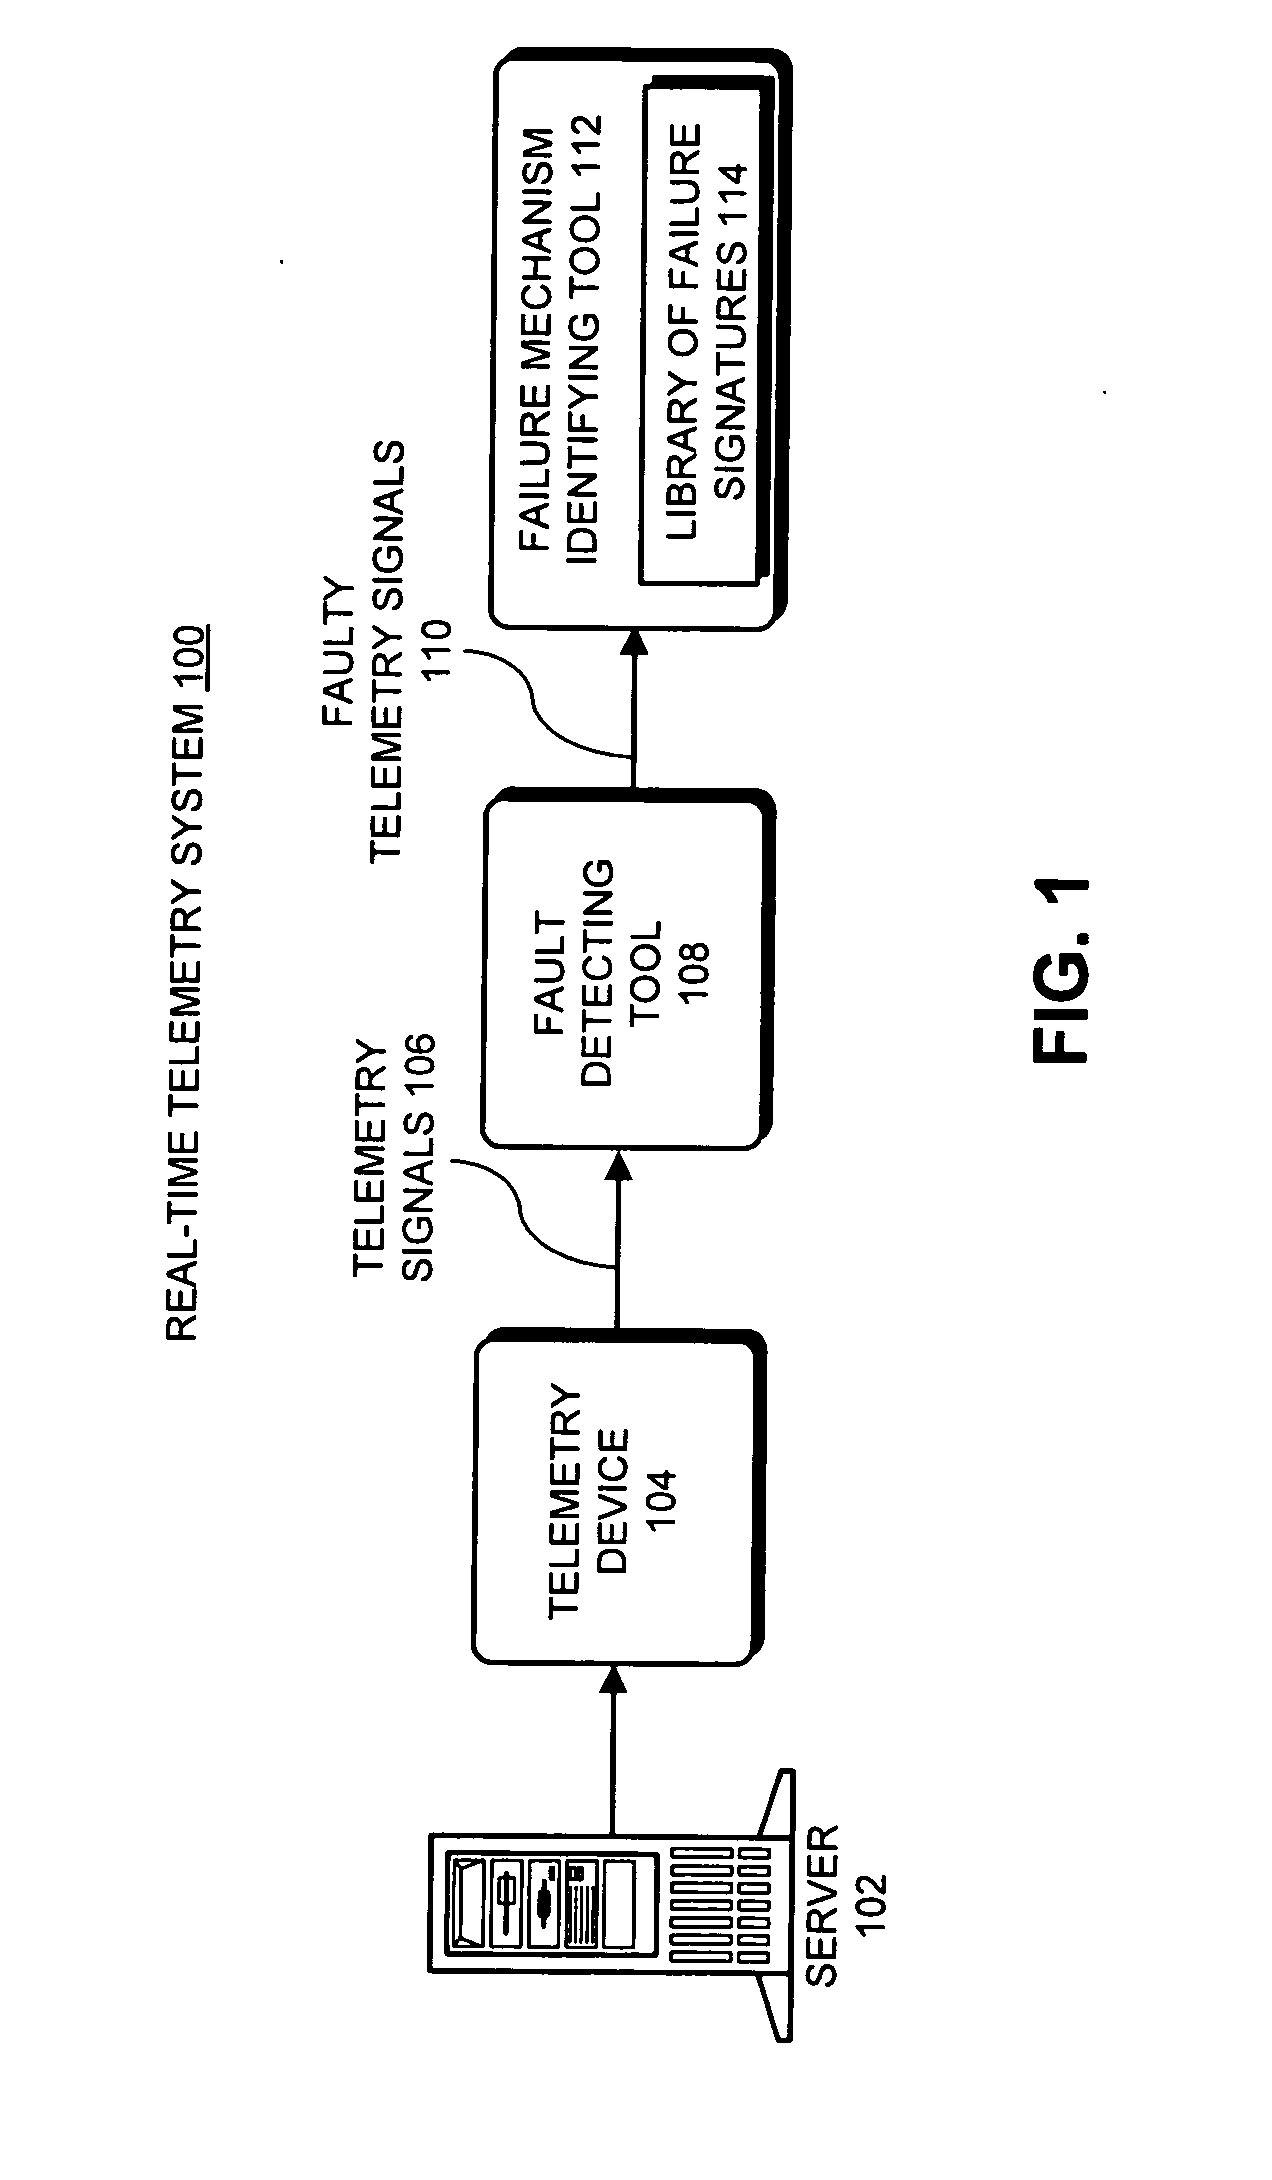 Method and apparatus for identifying a failure mechanism for a component in a computer system